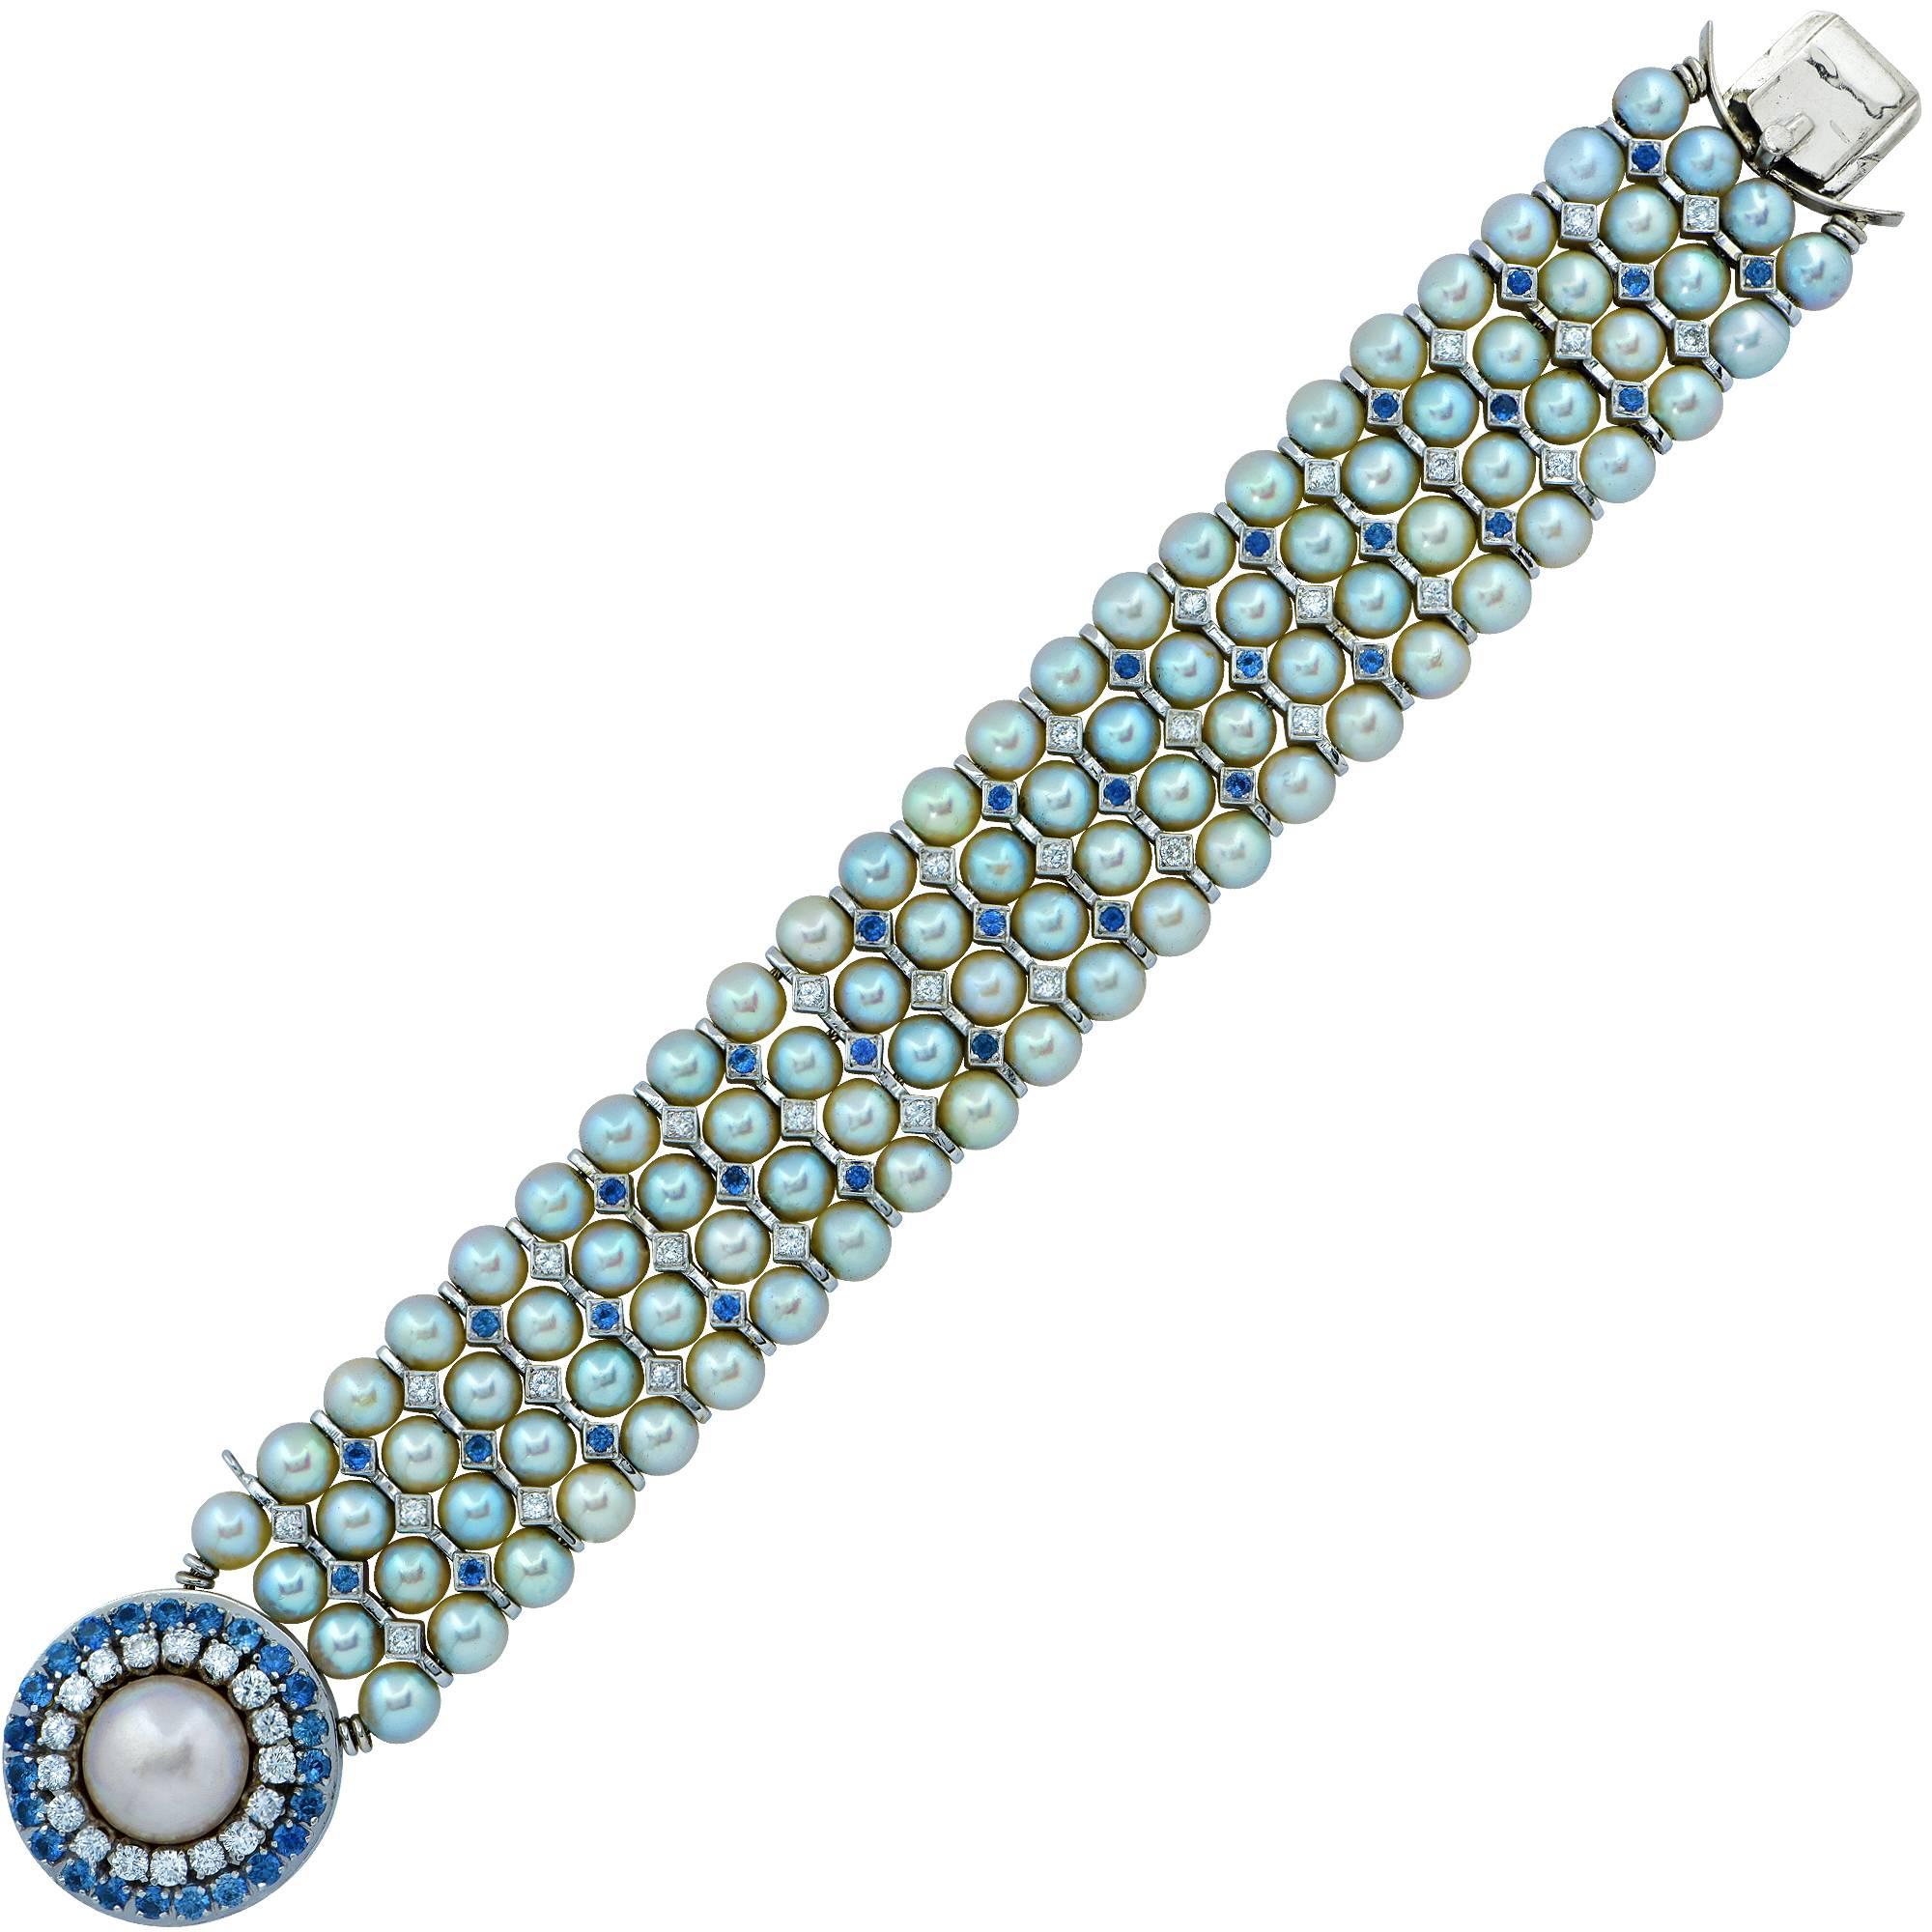 White gold bracelet featuring 92 round pearls measuring 6mm accented by 50 round brilliant cut diamonds weighing approximately 1.50cts and and 56 sapphires weighing approximately 1.80cts.

The bracelet measures 7.25 inches in length by 1 inch in